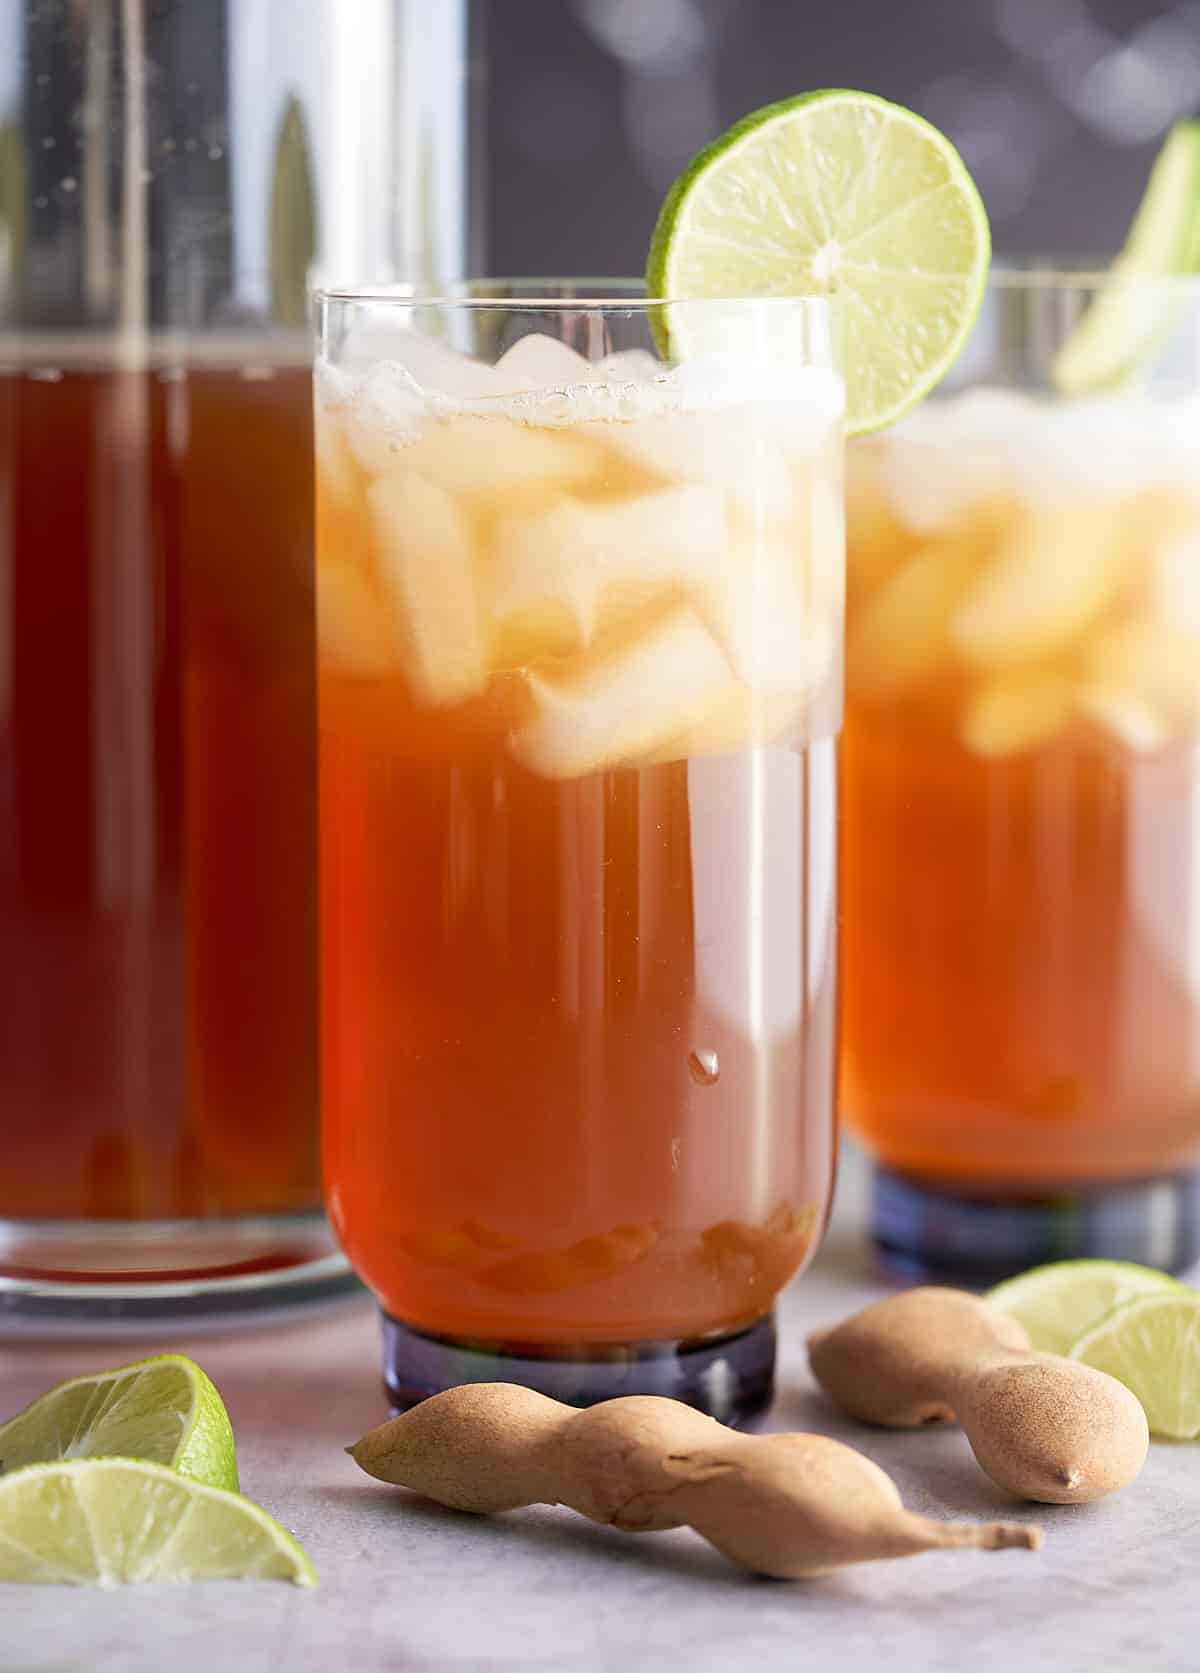 Two glasses of iced tamarind juice garnished with a slice of fresh lime with a pitcher of tamarind juice set alongside.